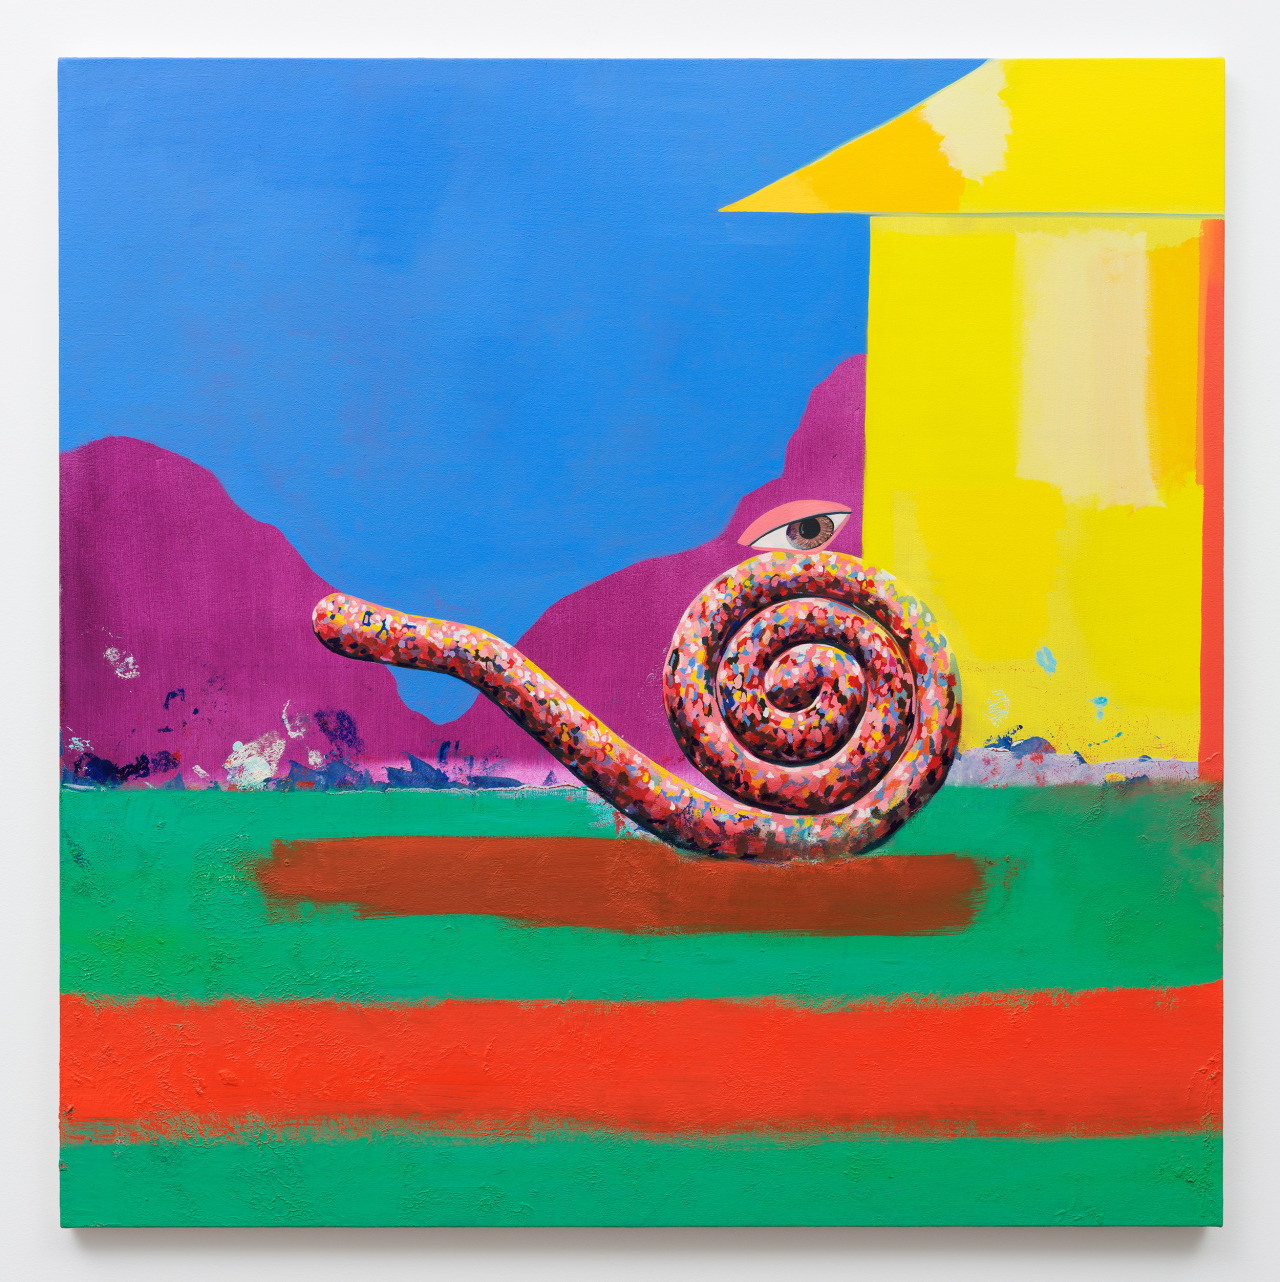   Untitled, Sausage-yes , (Sprial), 2015  Oil on canvas  40 x 40 inches&nbsp; 